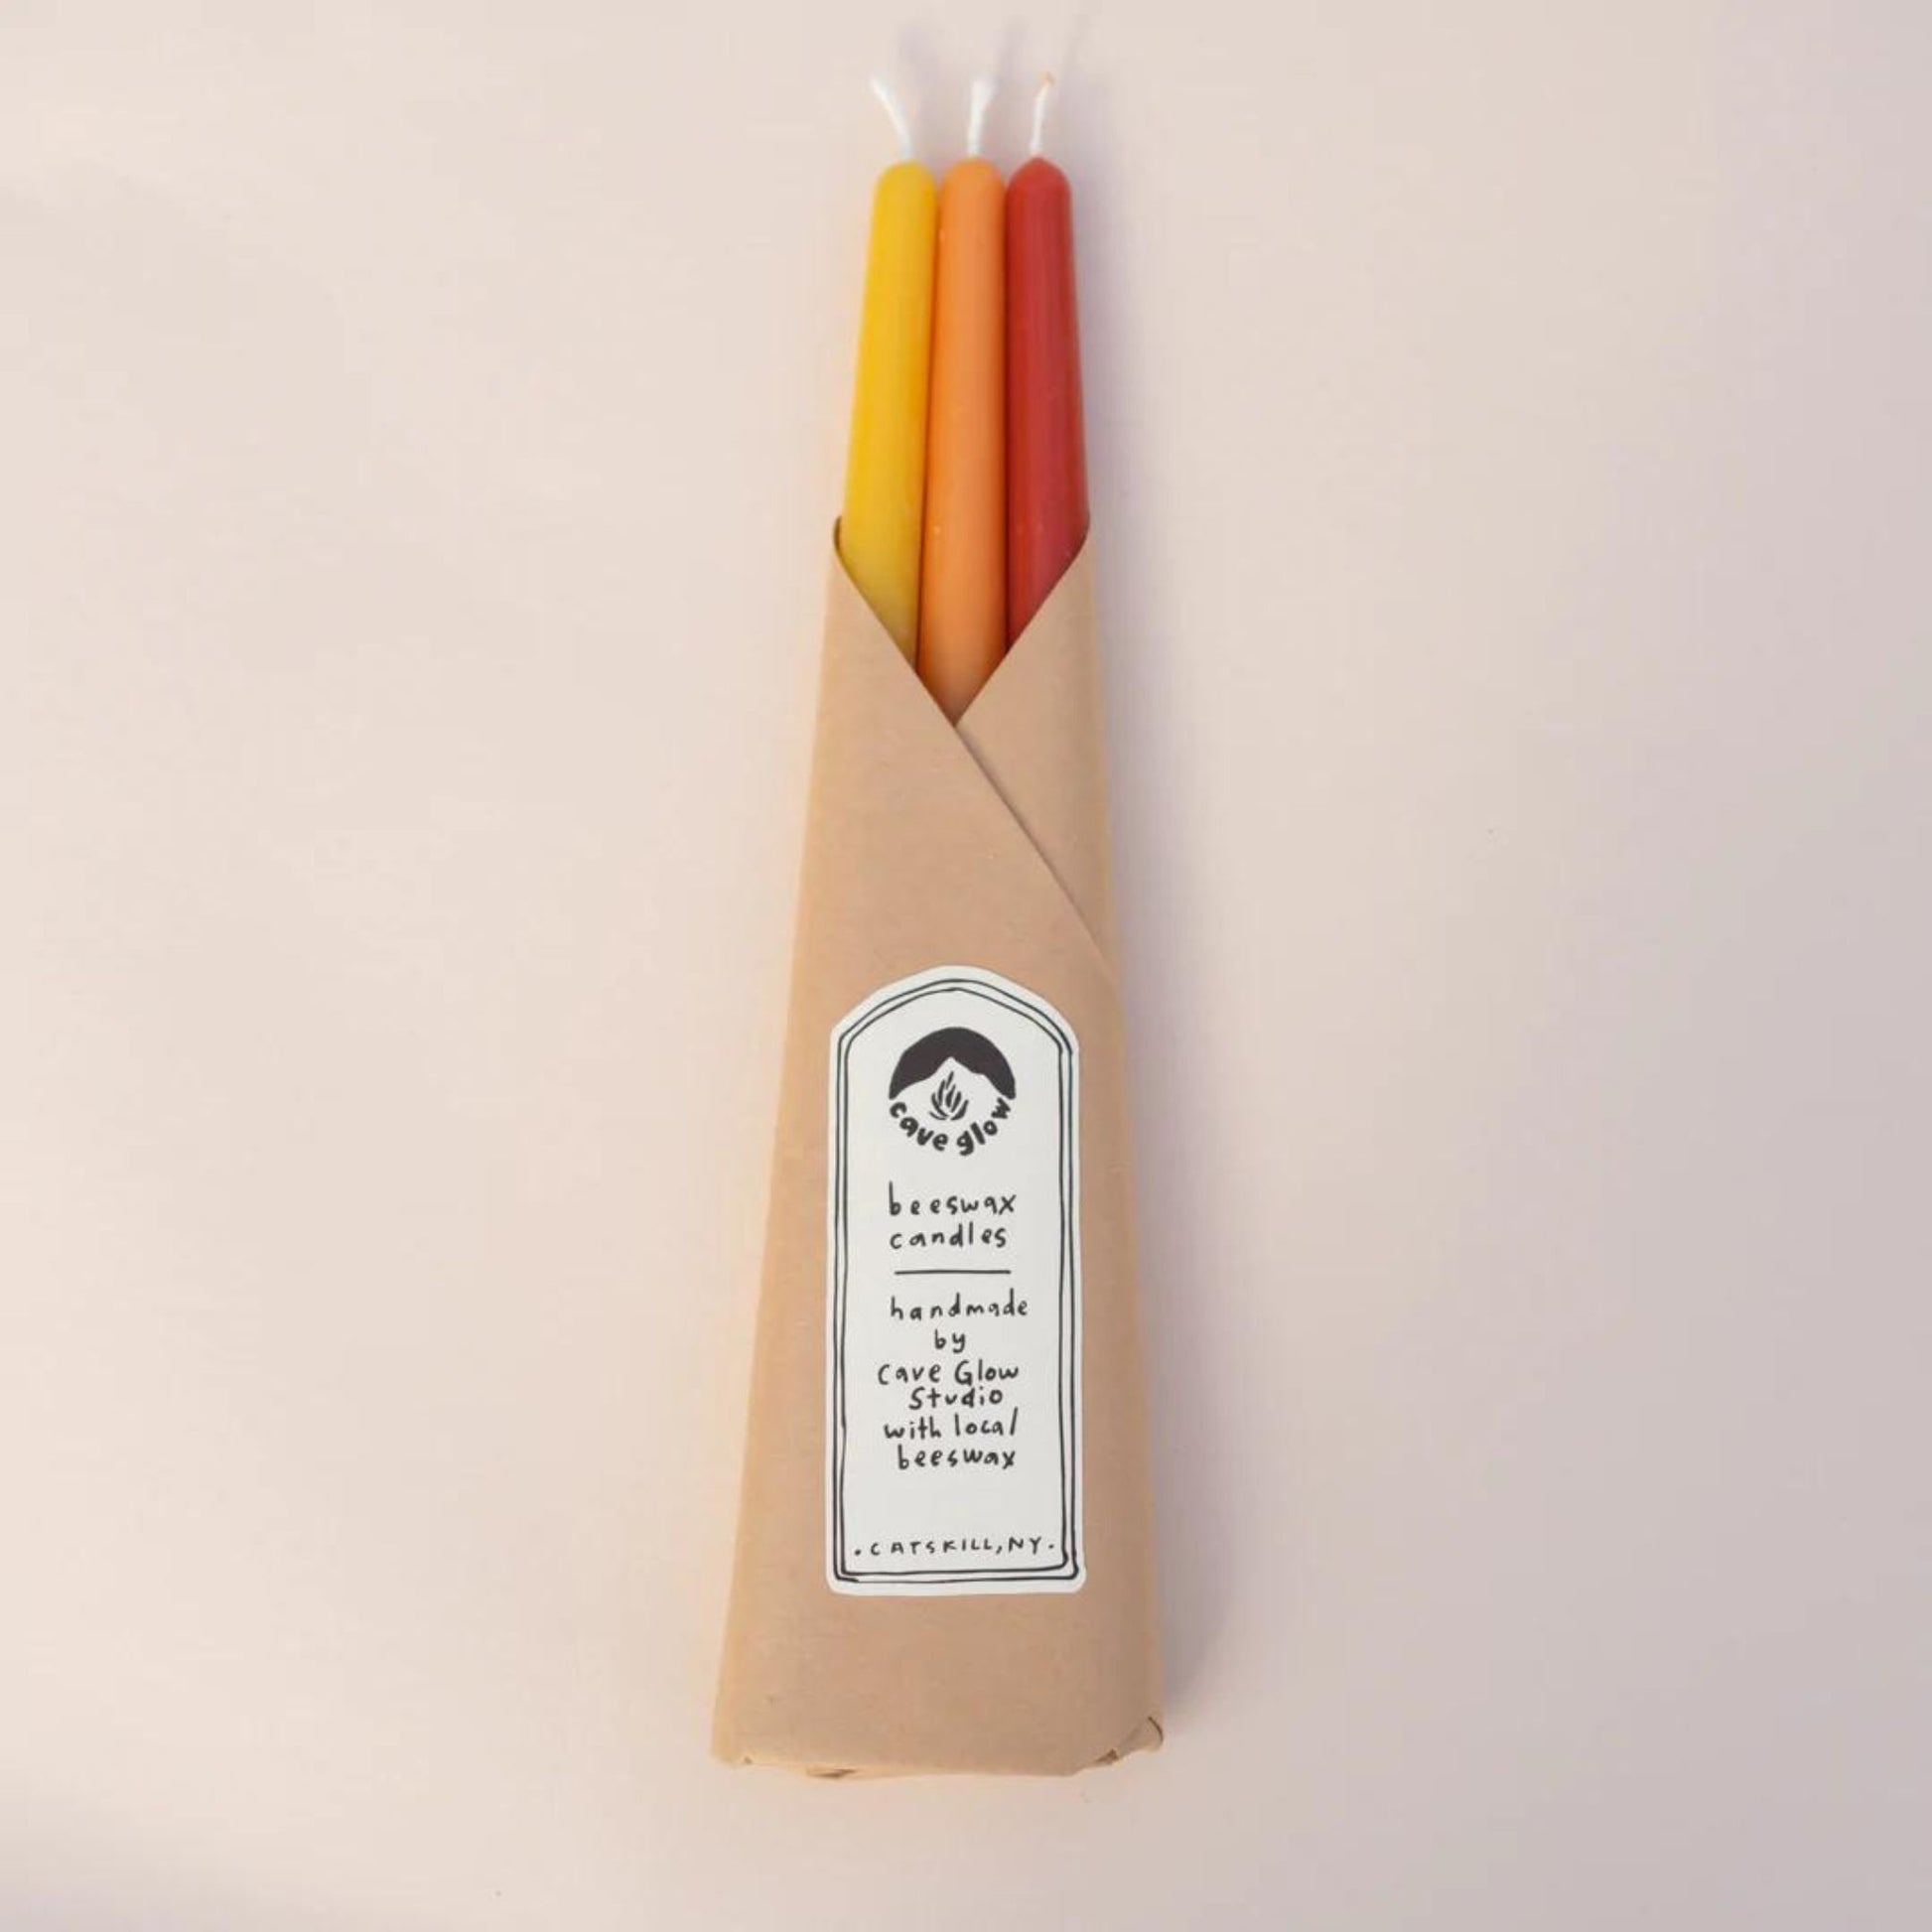 Sunrise Beeswax Spiral Taper Candles